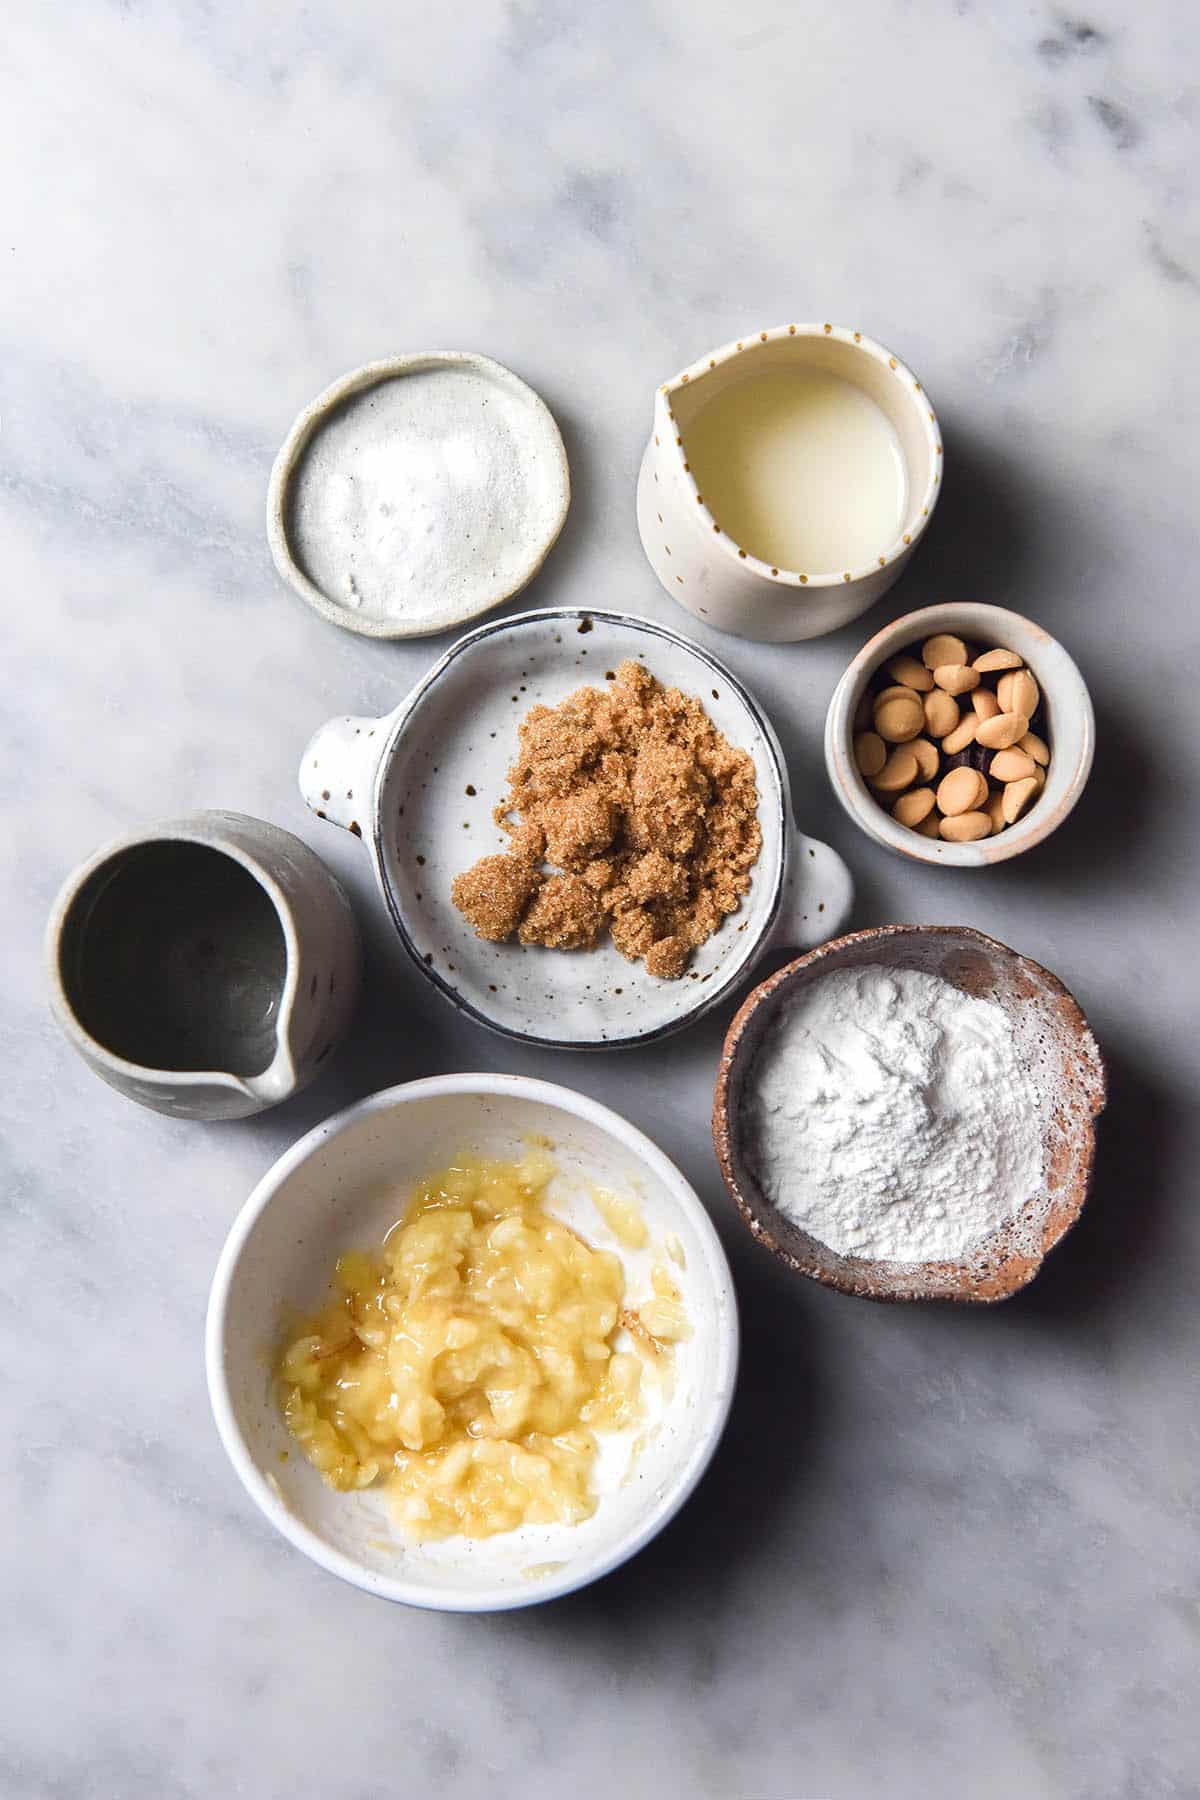 An aerial image of the ingredients used to make a single serve gluten free banana choc chip muffin arranged on a white marble table